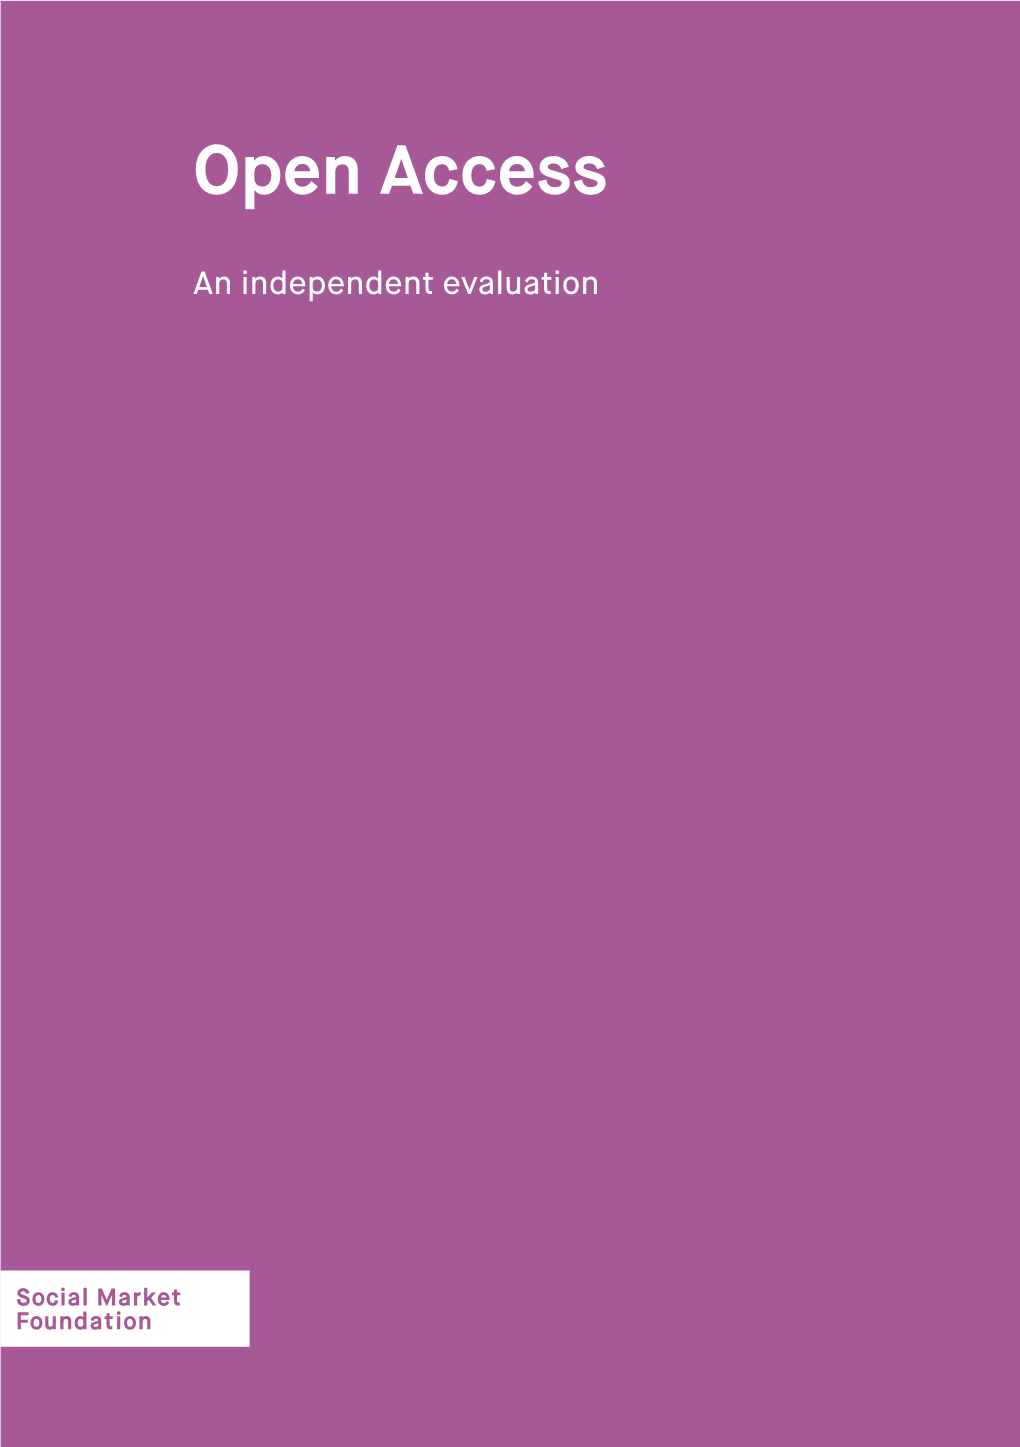 Open Access: an Independent Evaluation